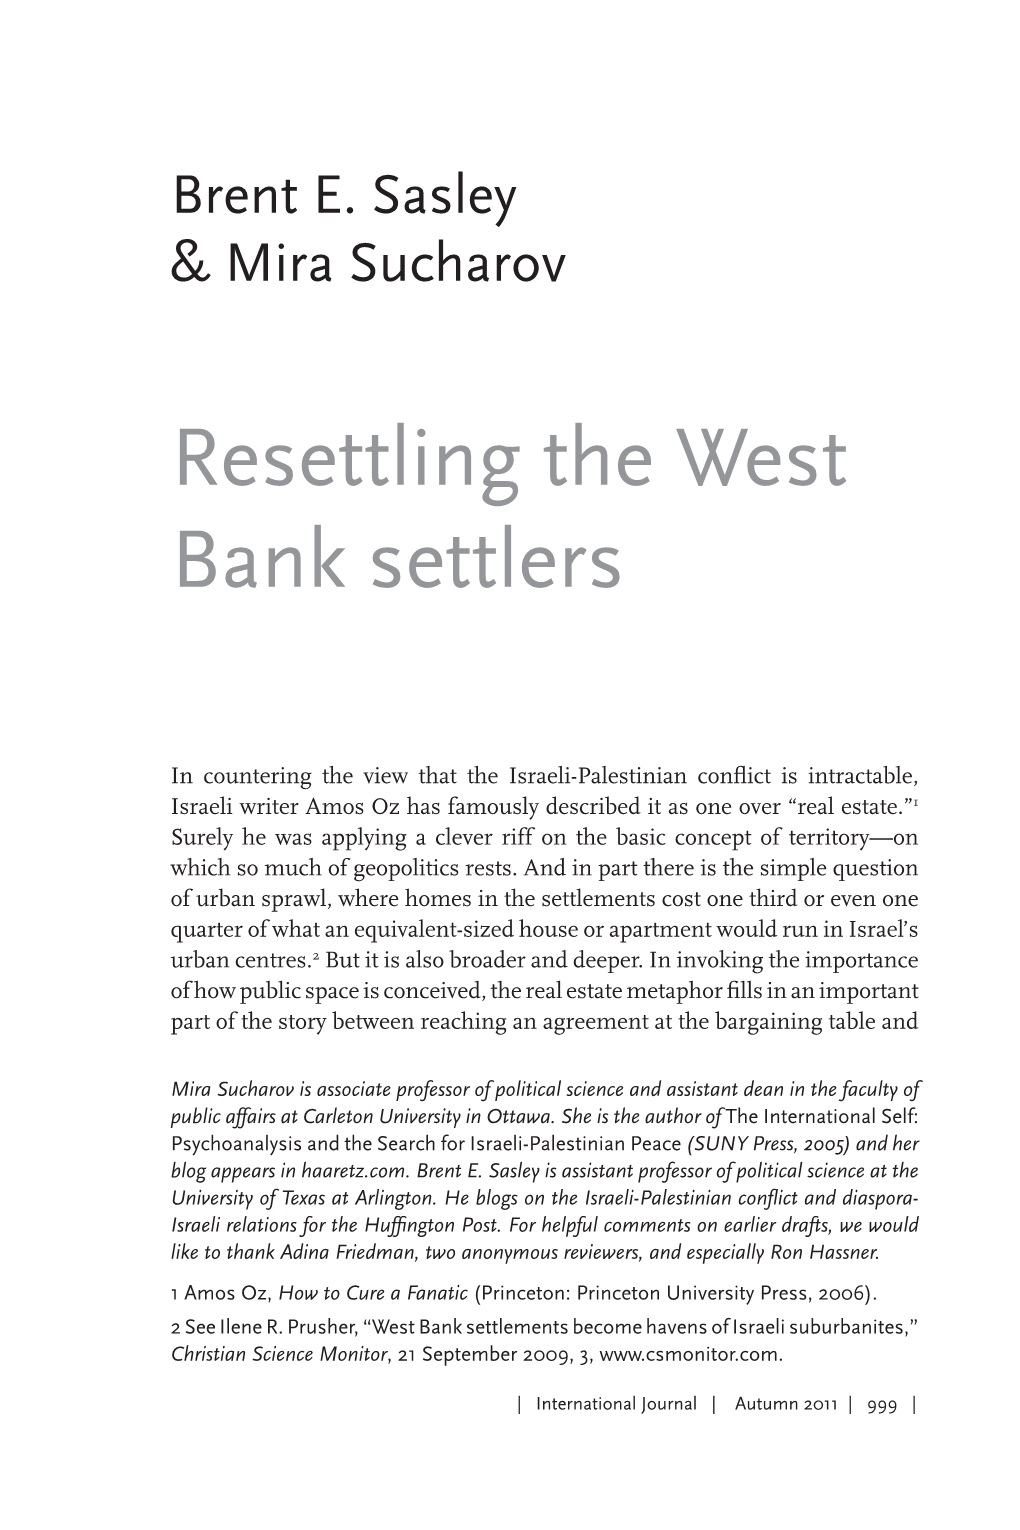 Resettling the West Bank Settlers